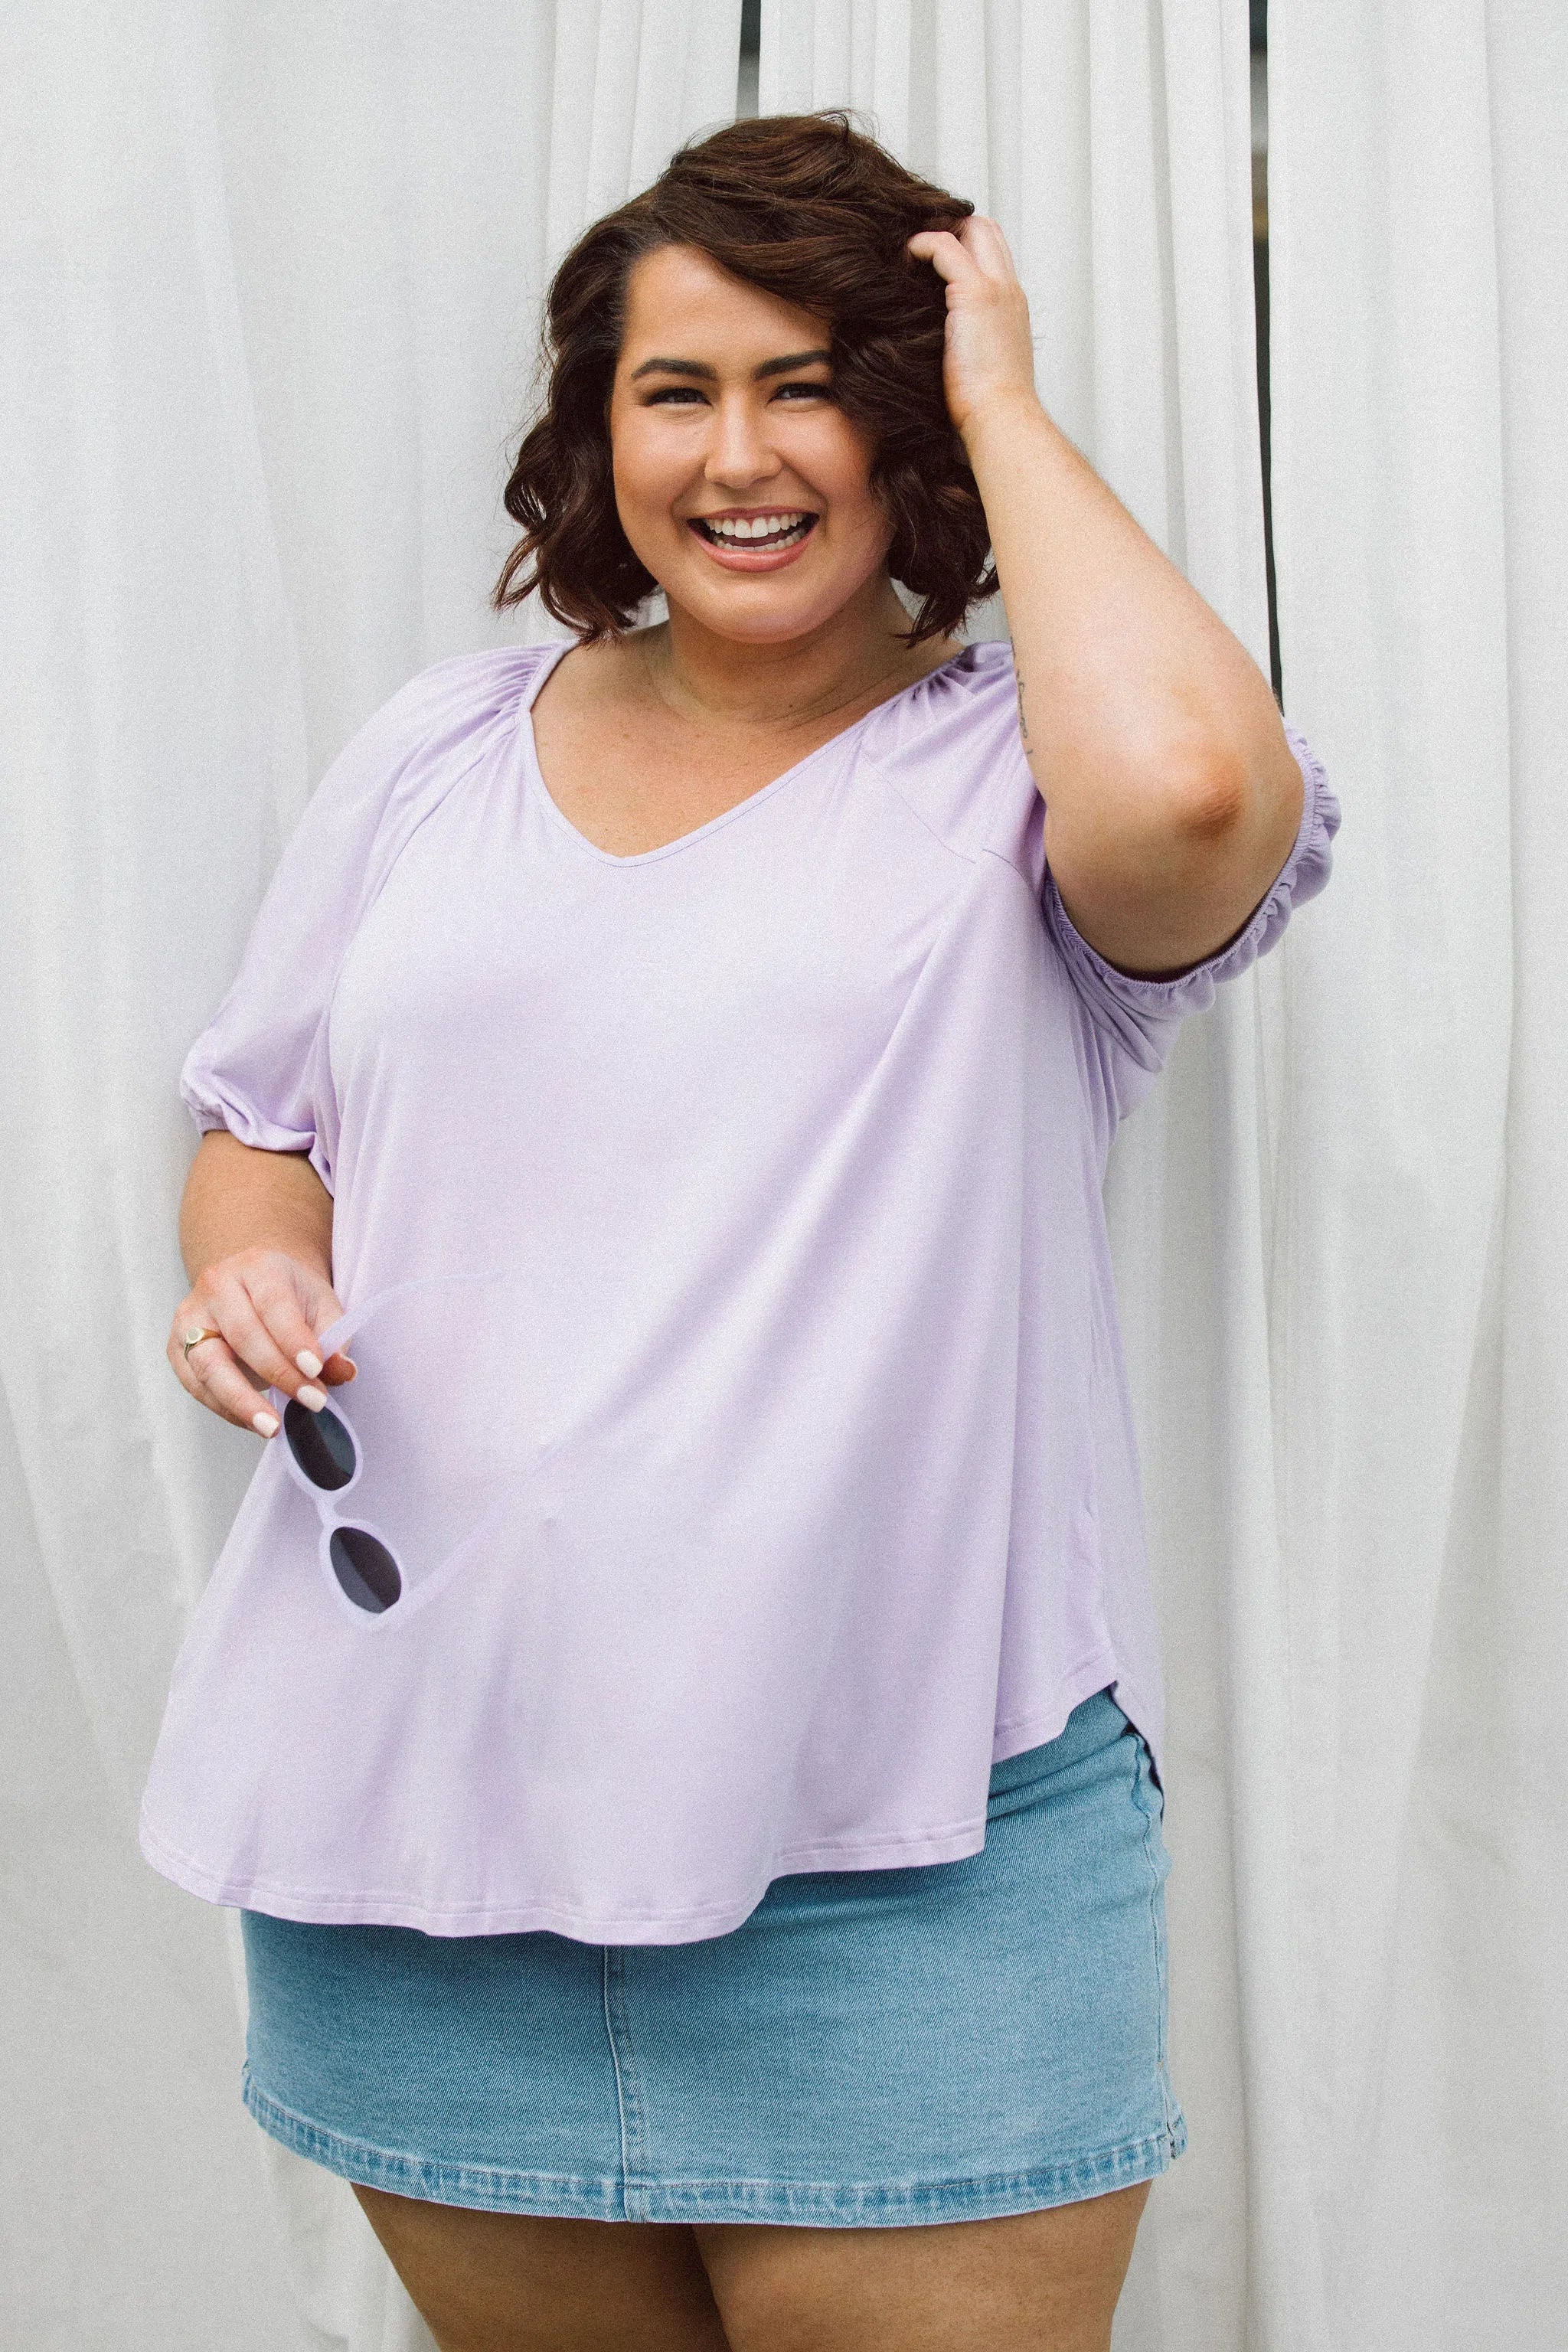 Womens Plus Size Top, Remi Top in purple Lilac, Side